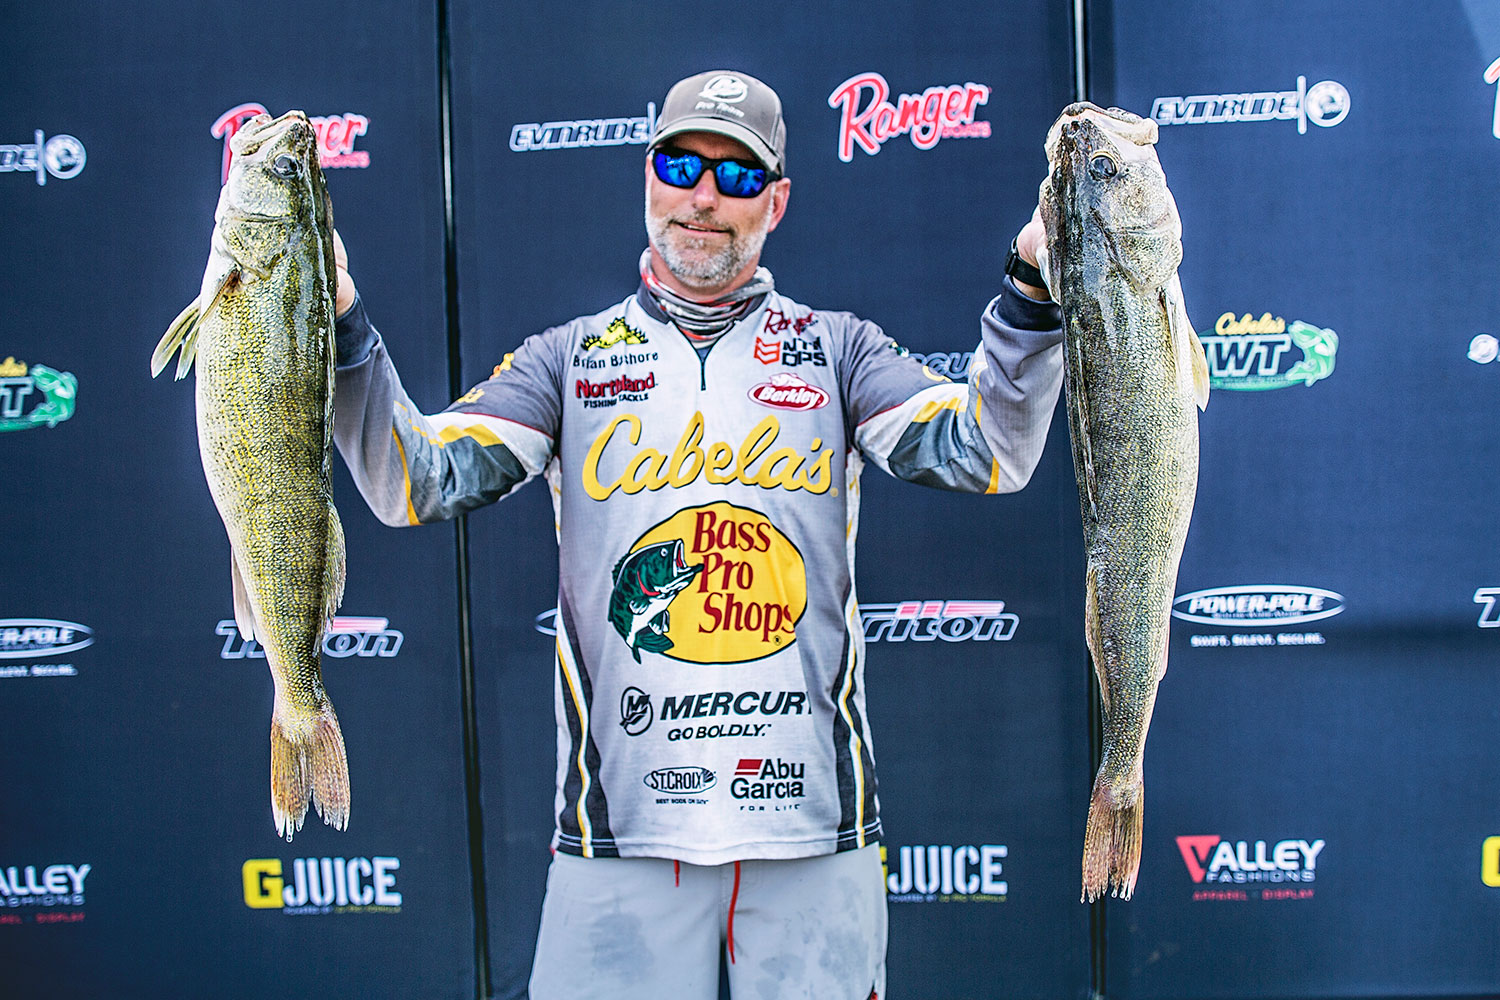 Brian Bashore holds up two walleye at a fishing tournament.